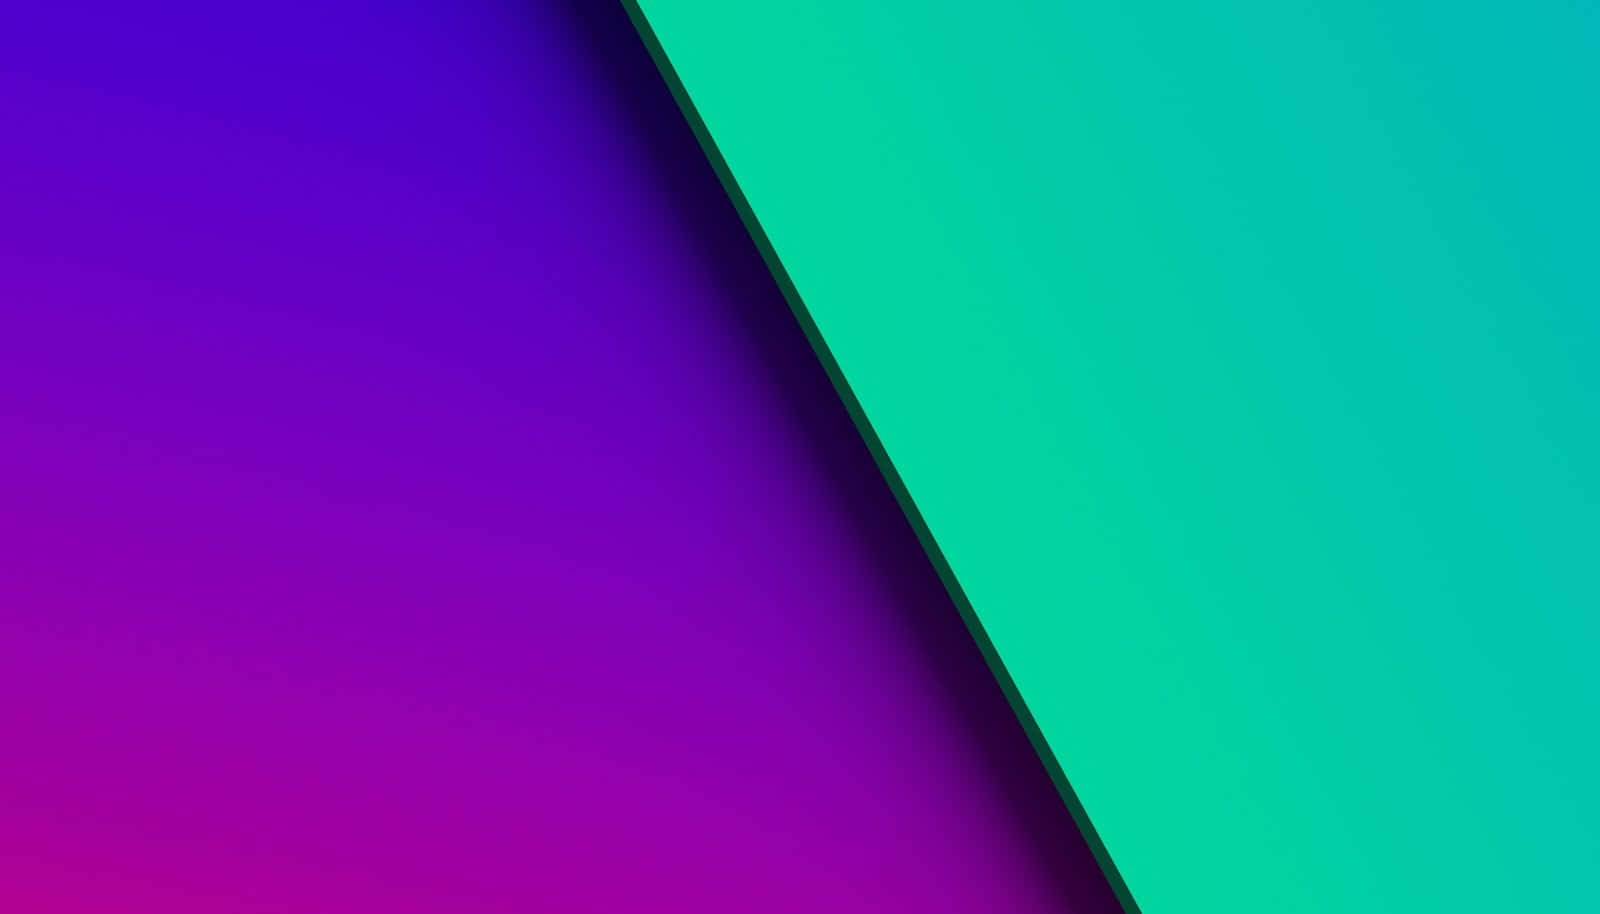 A Colorful Background With A Triangle Shape